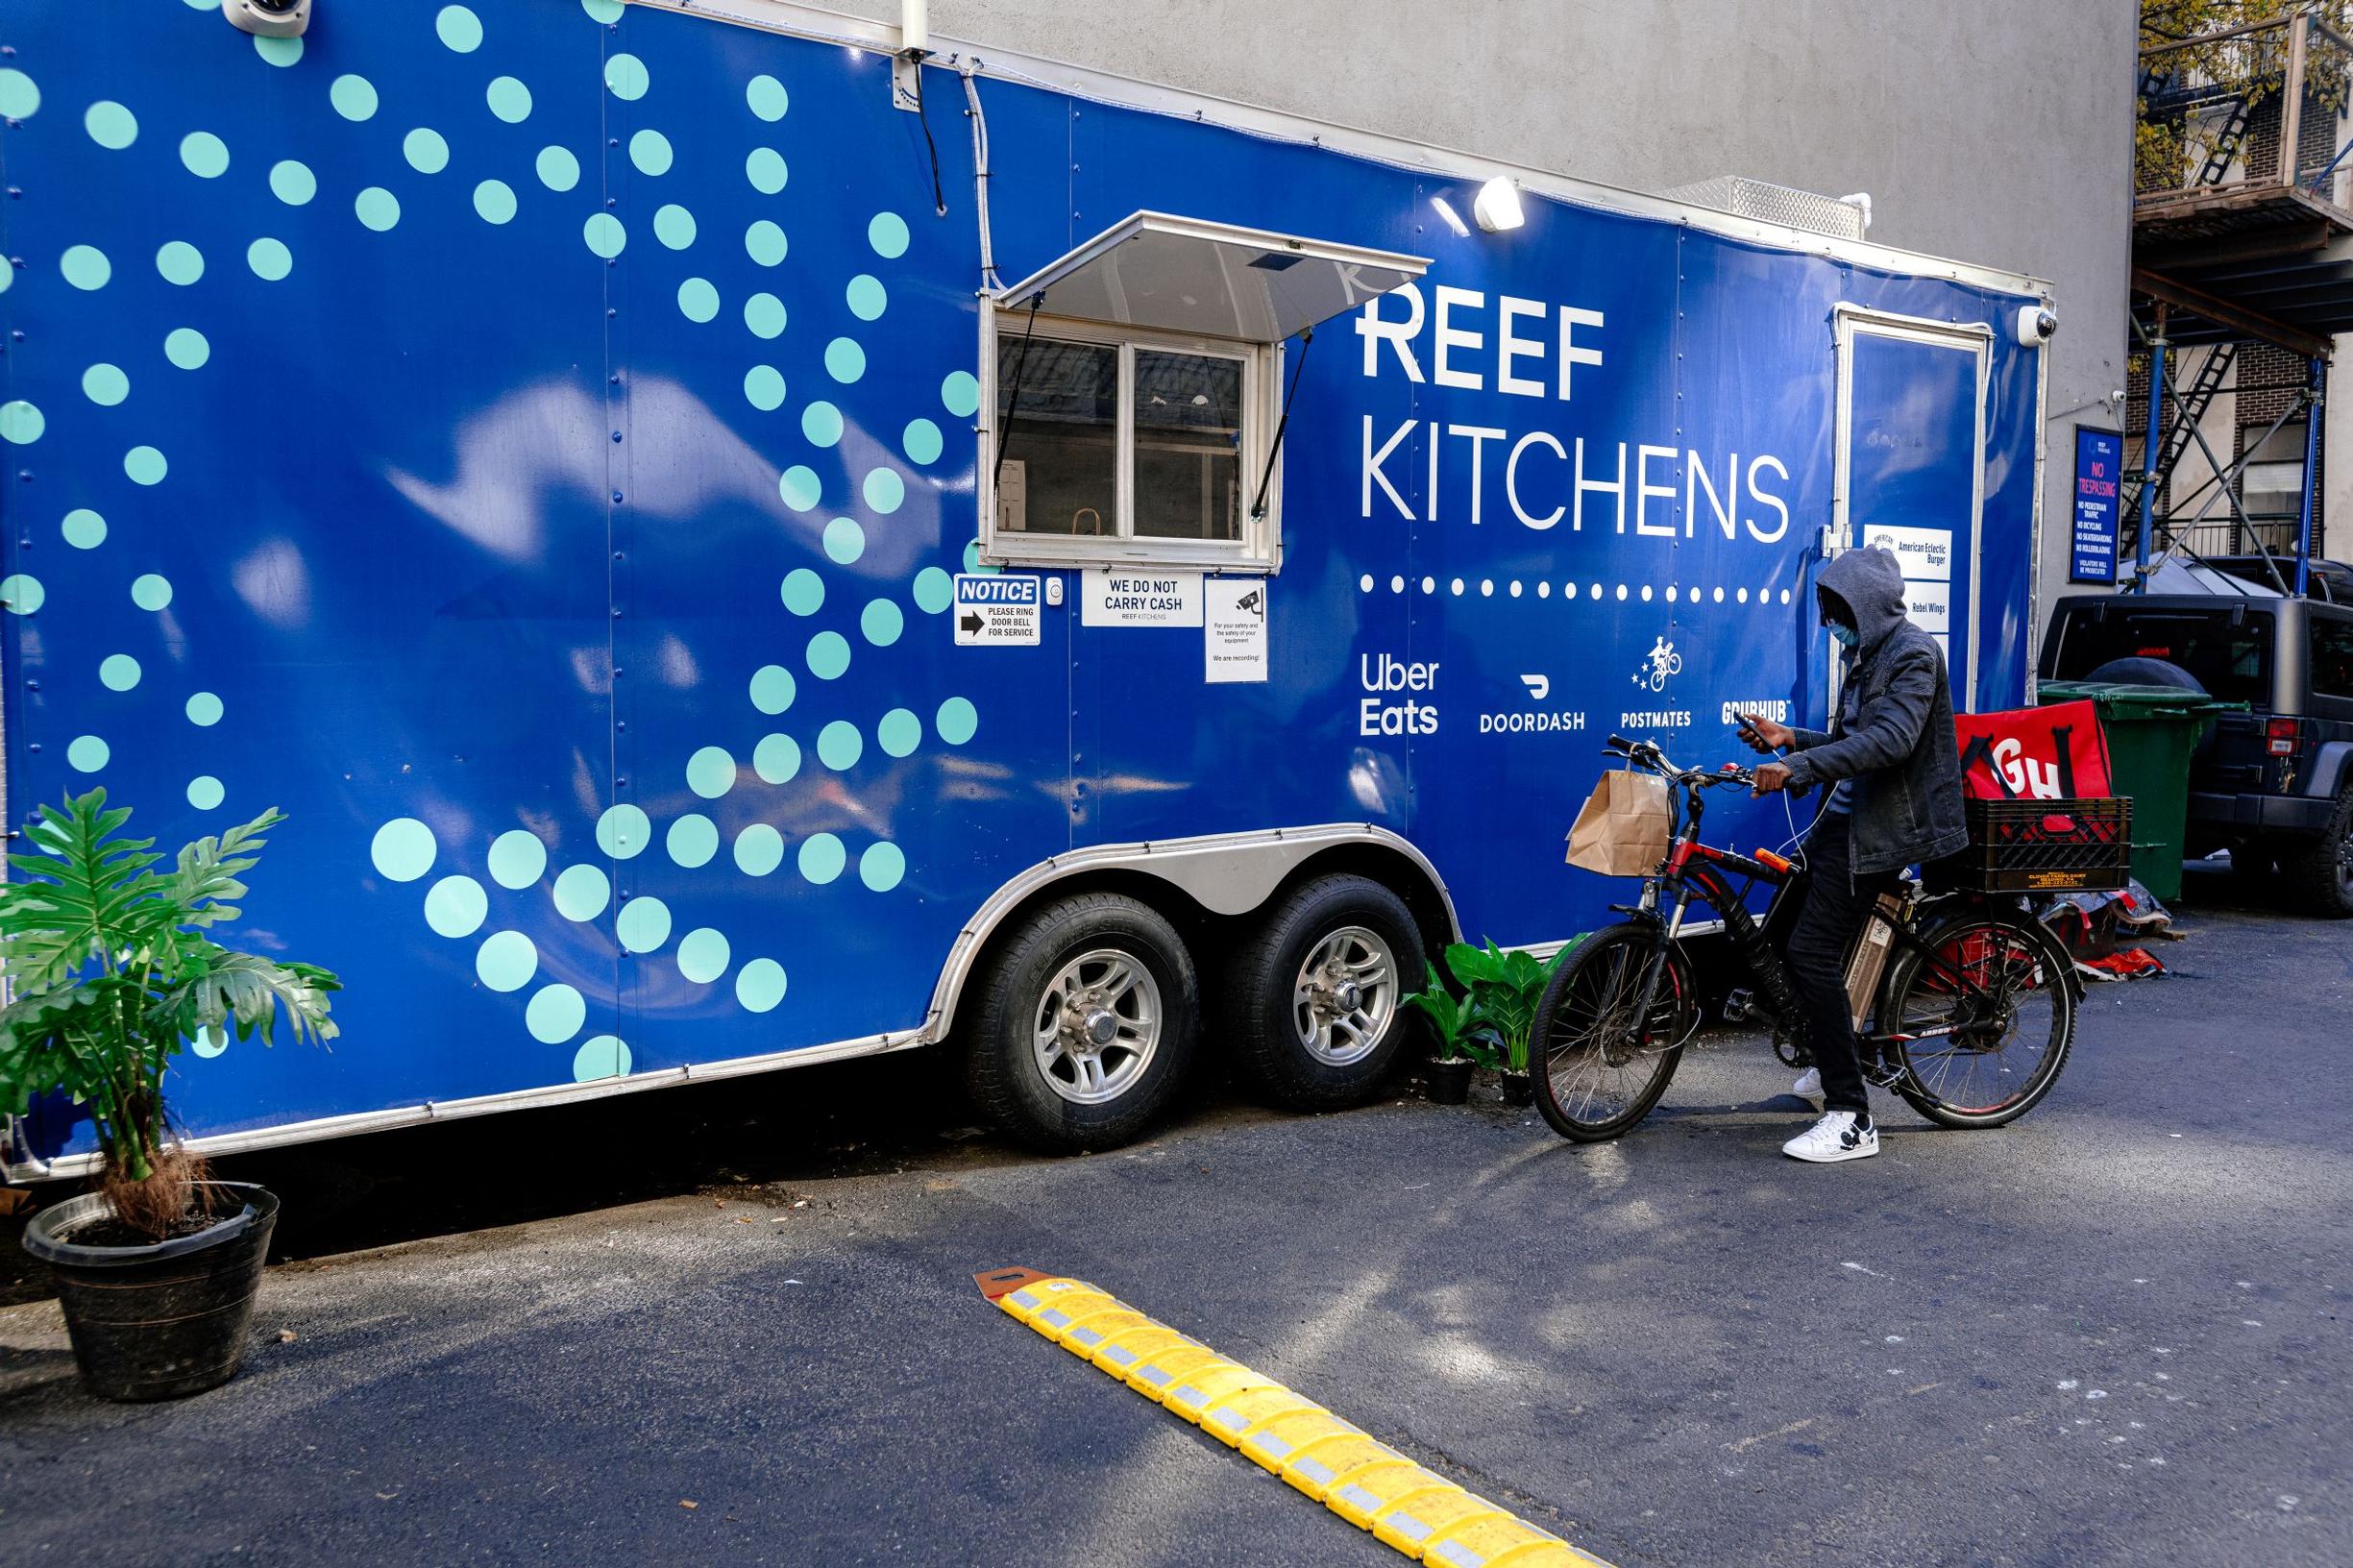 A REEF mobile kitchen